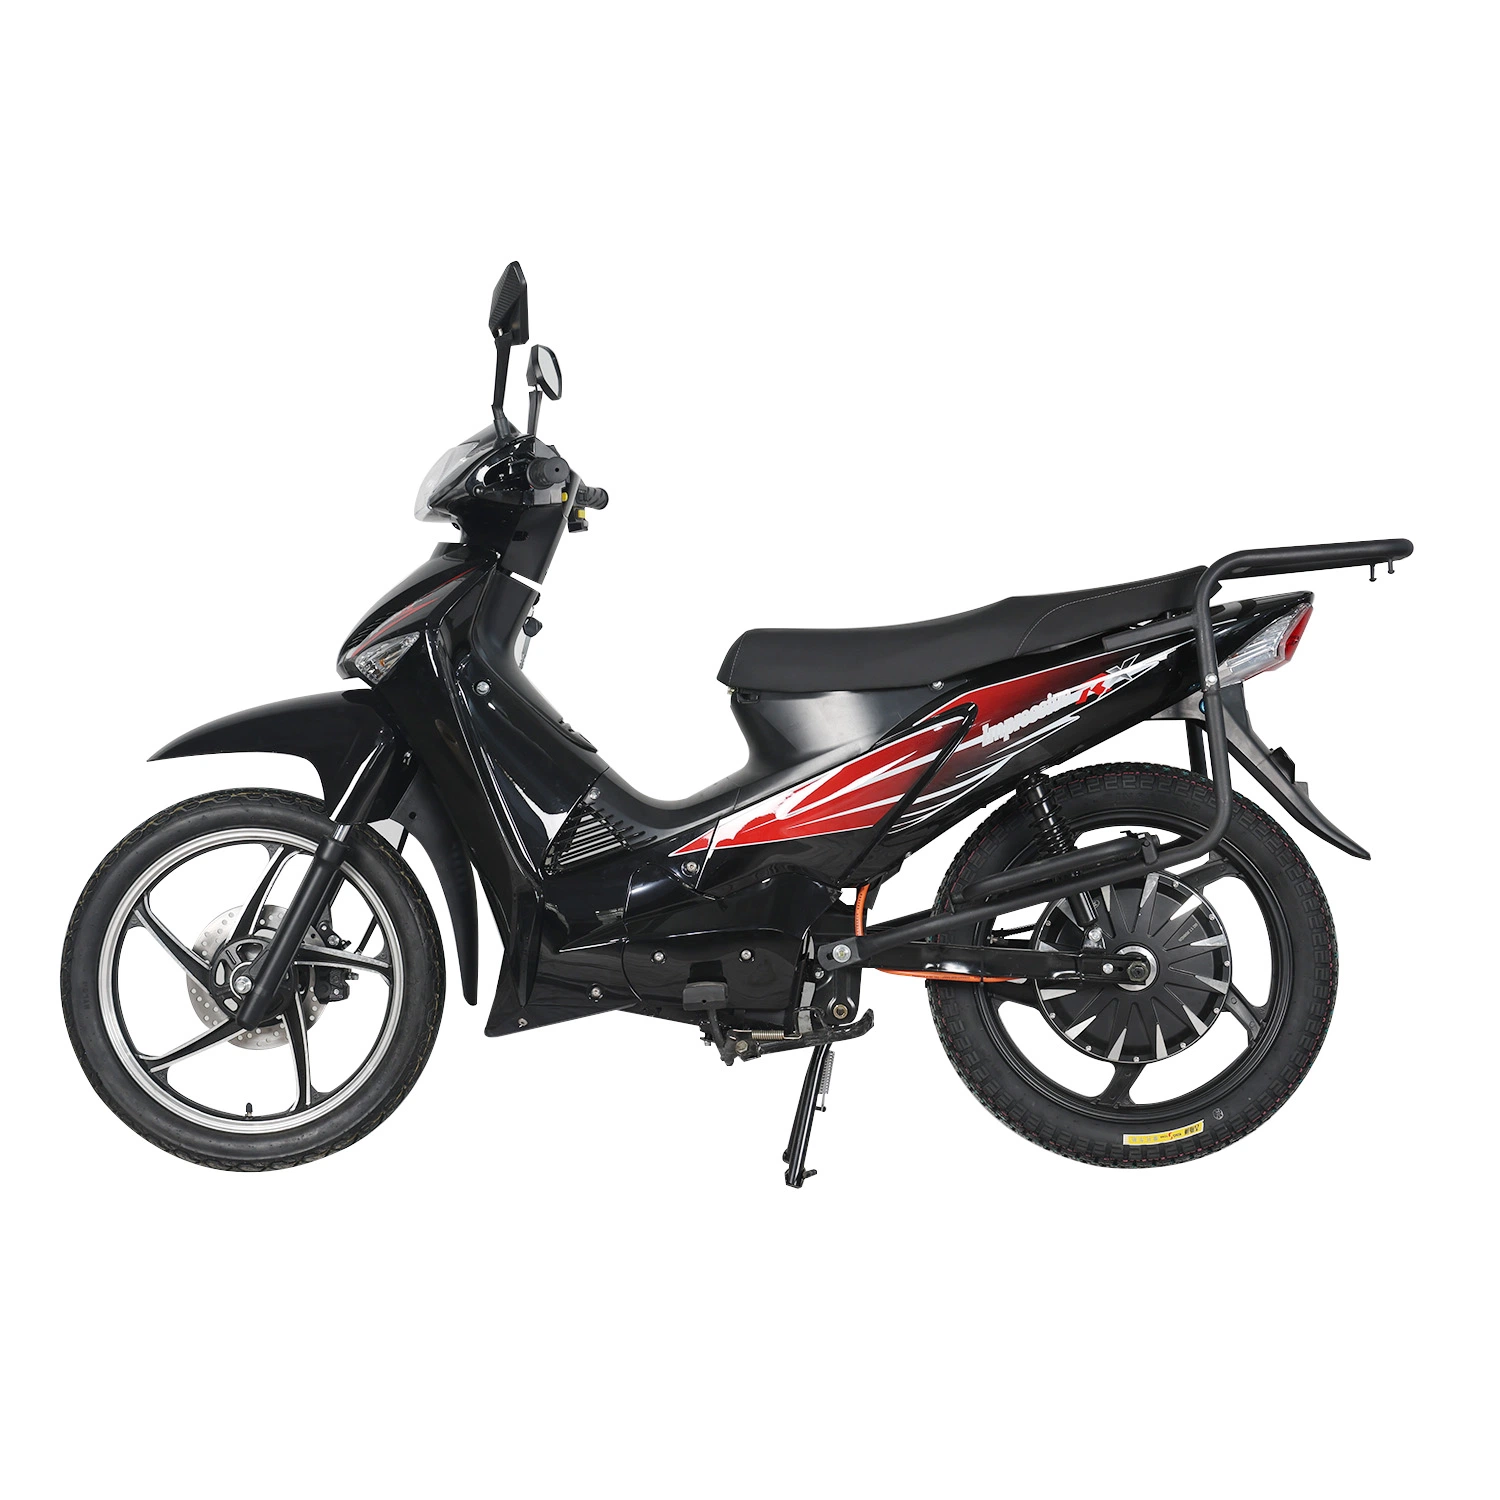 Factory 3000W High Speed Motor Electric Motorcycle Hot Selling Sport Bike E- Motorcycle